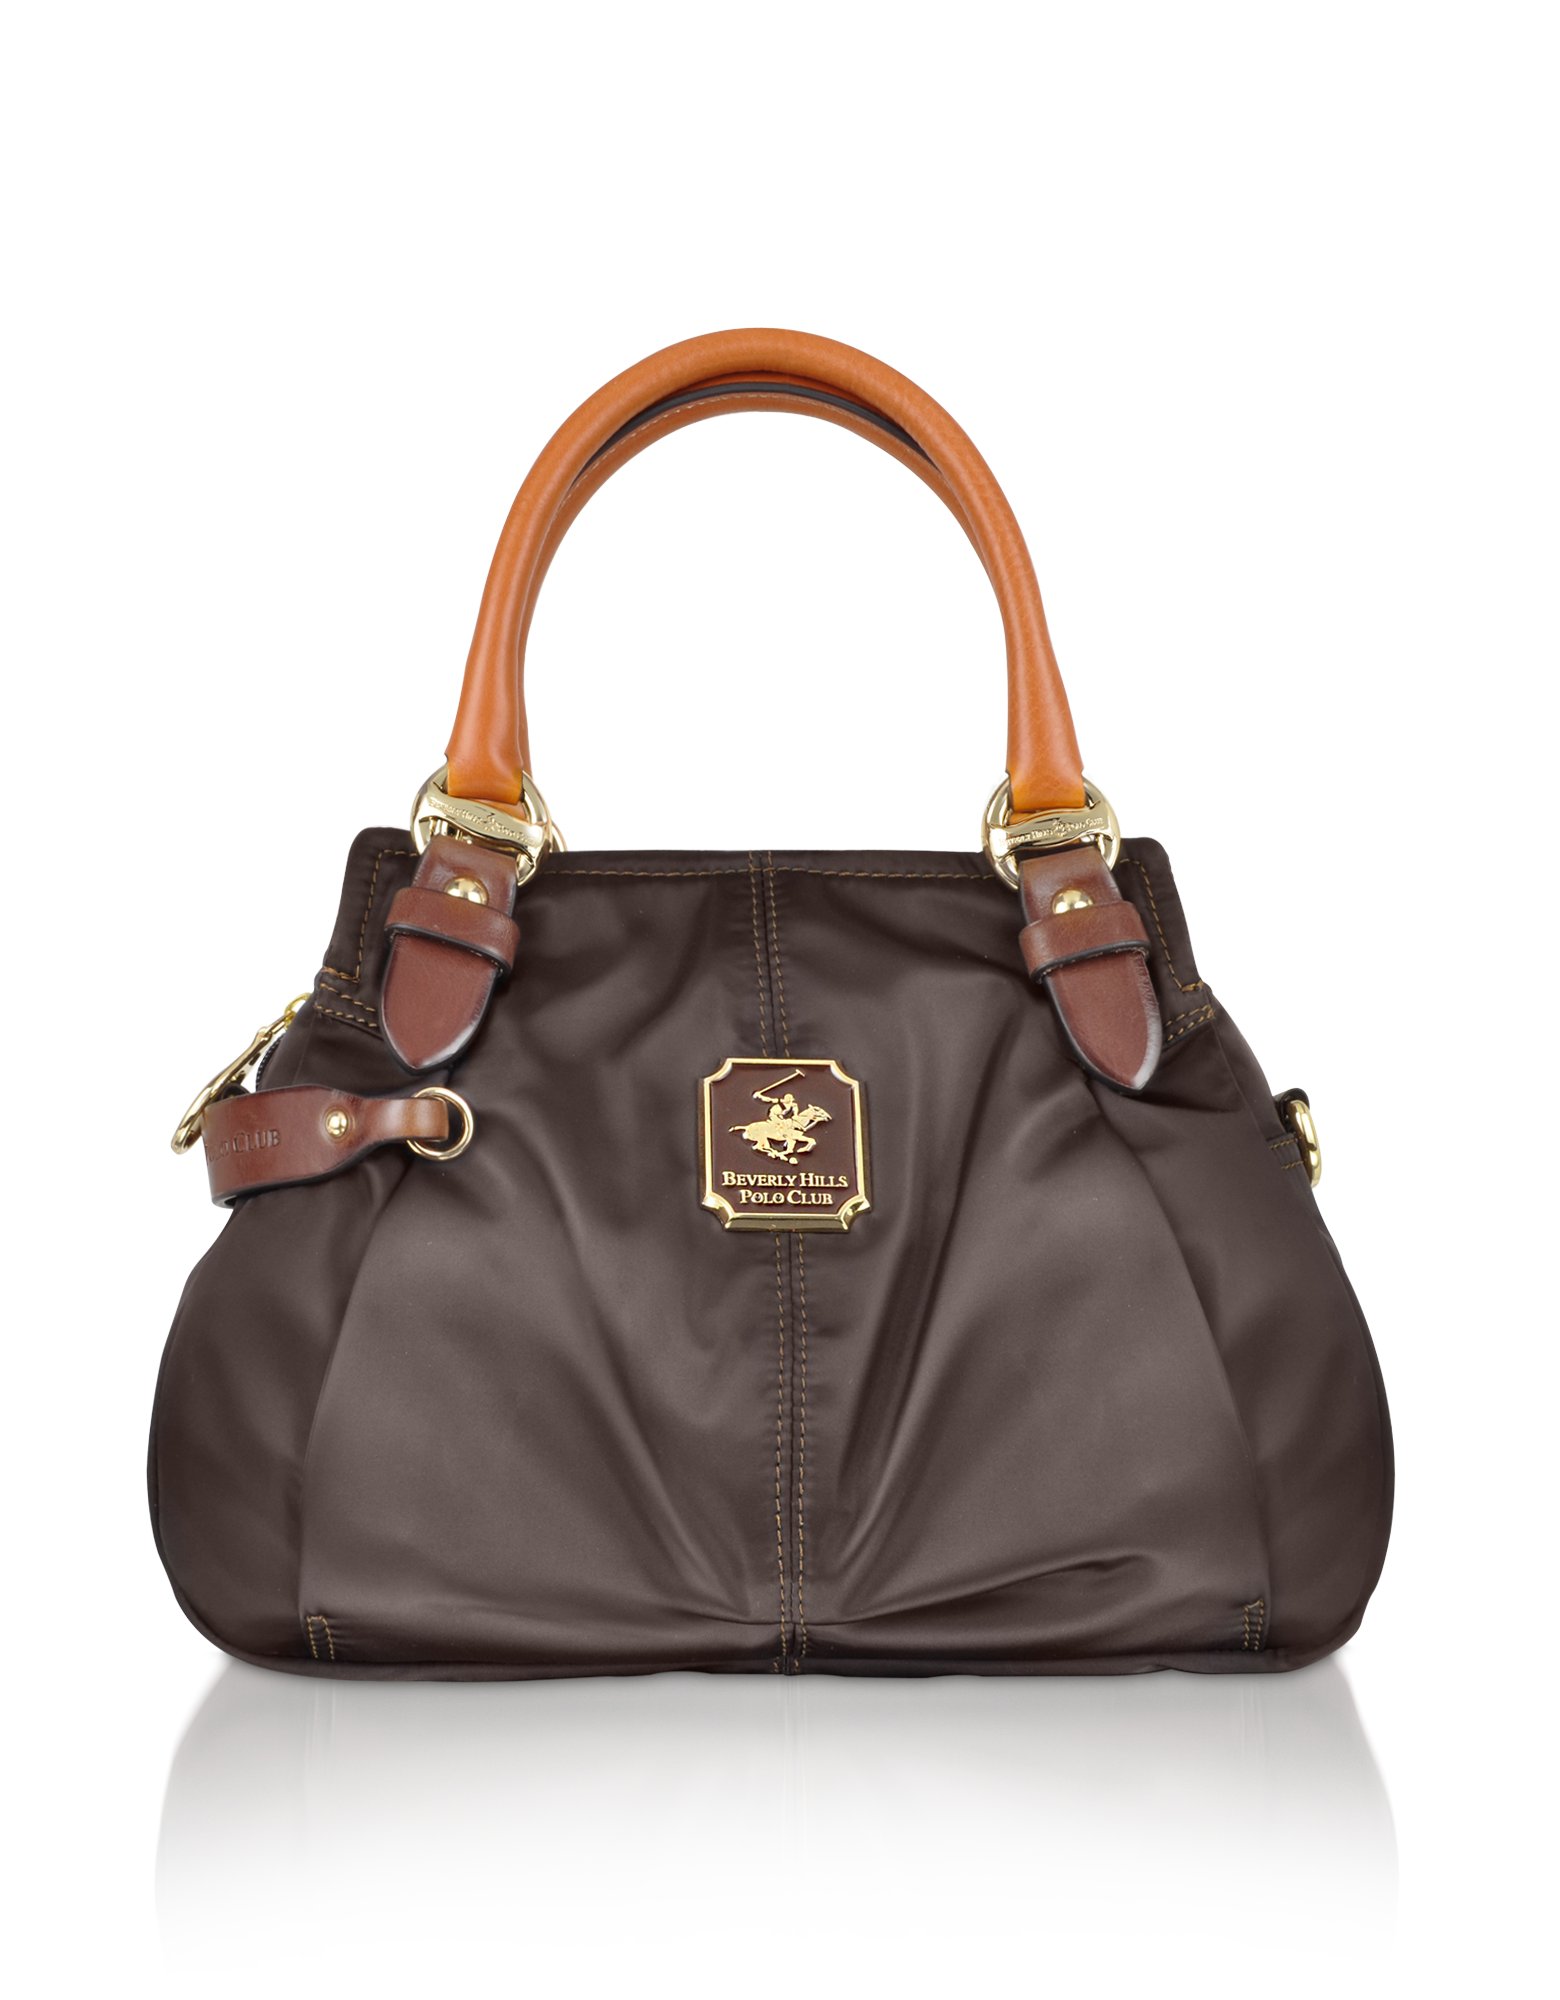 Lyst - Beverly Hills Polo Club Nylon and Leather Mini Satchel Bag in Brown